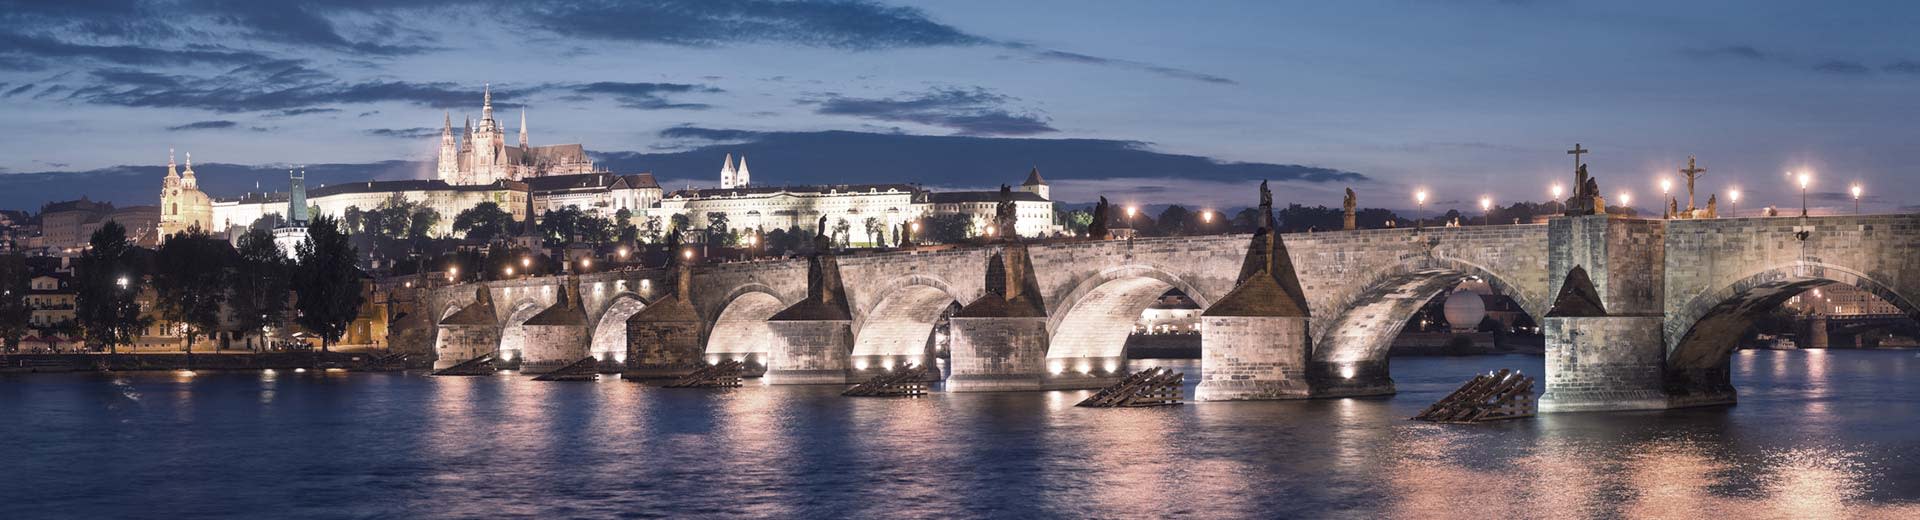 The famous Charles Bridge in Prague is deftly illuminated under a sky of dusk or dawn, with historic spires in the background.